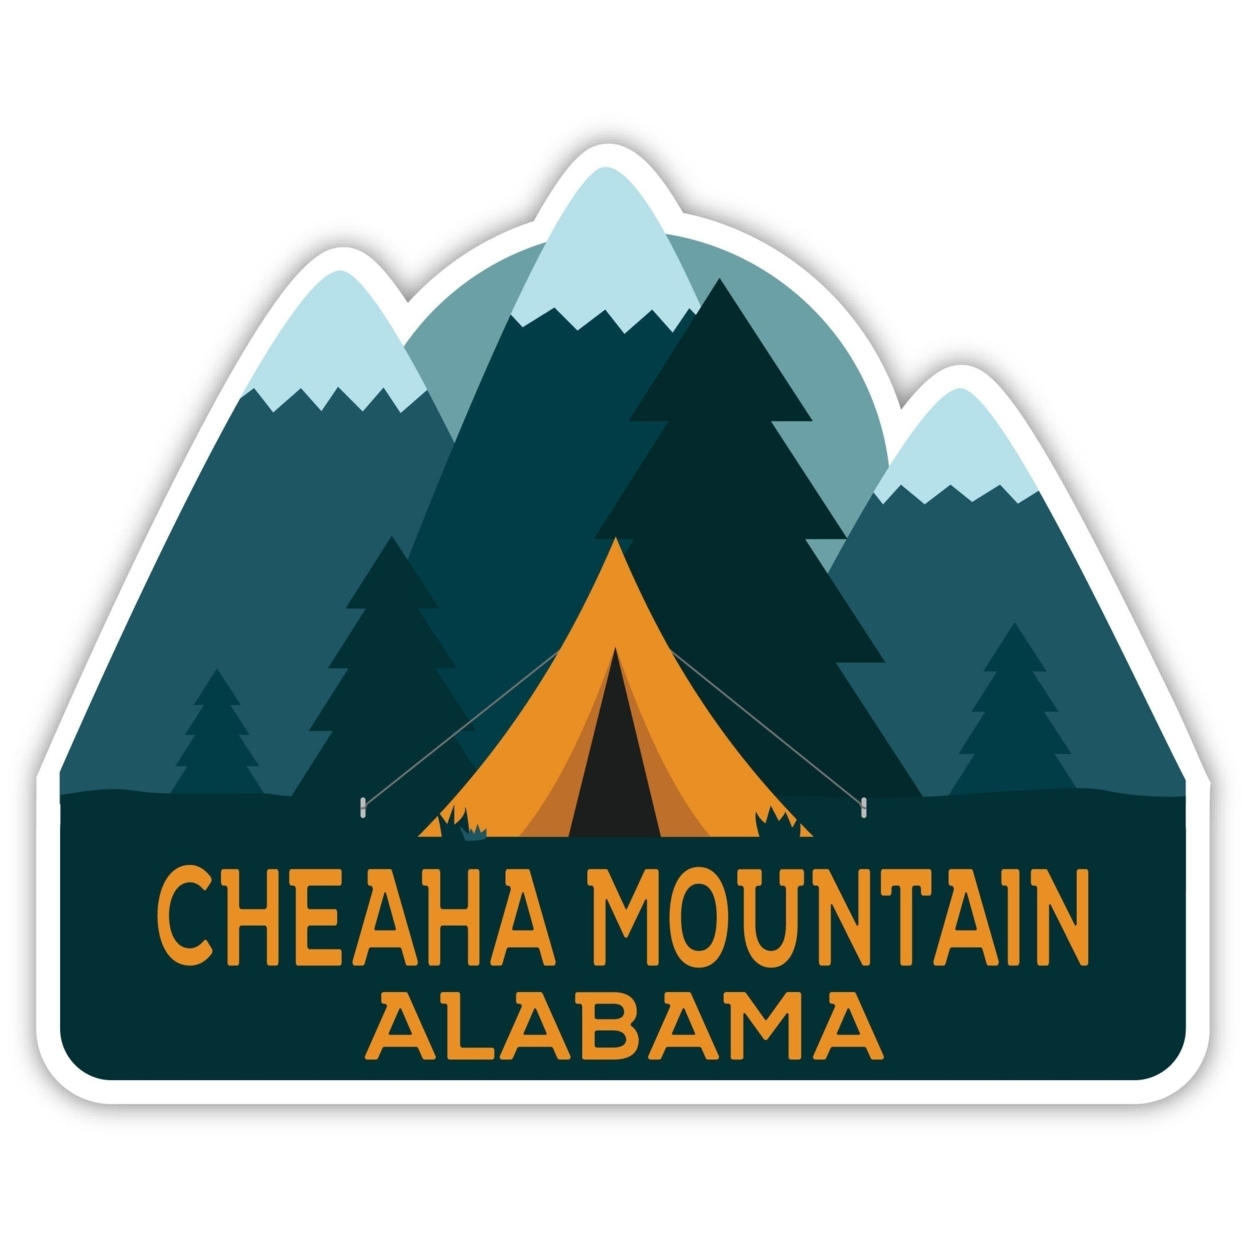 Cheaha Mountain Alabama Souvenir Decorative Stickers (Choose Theme And Size) - Single Unit, 8-Inch, Great Outdoors